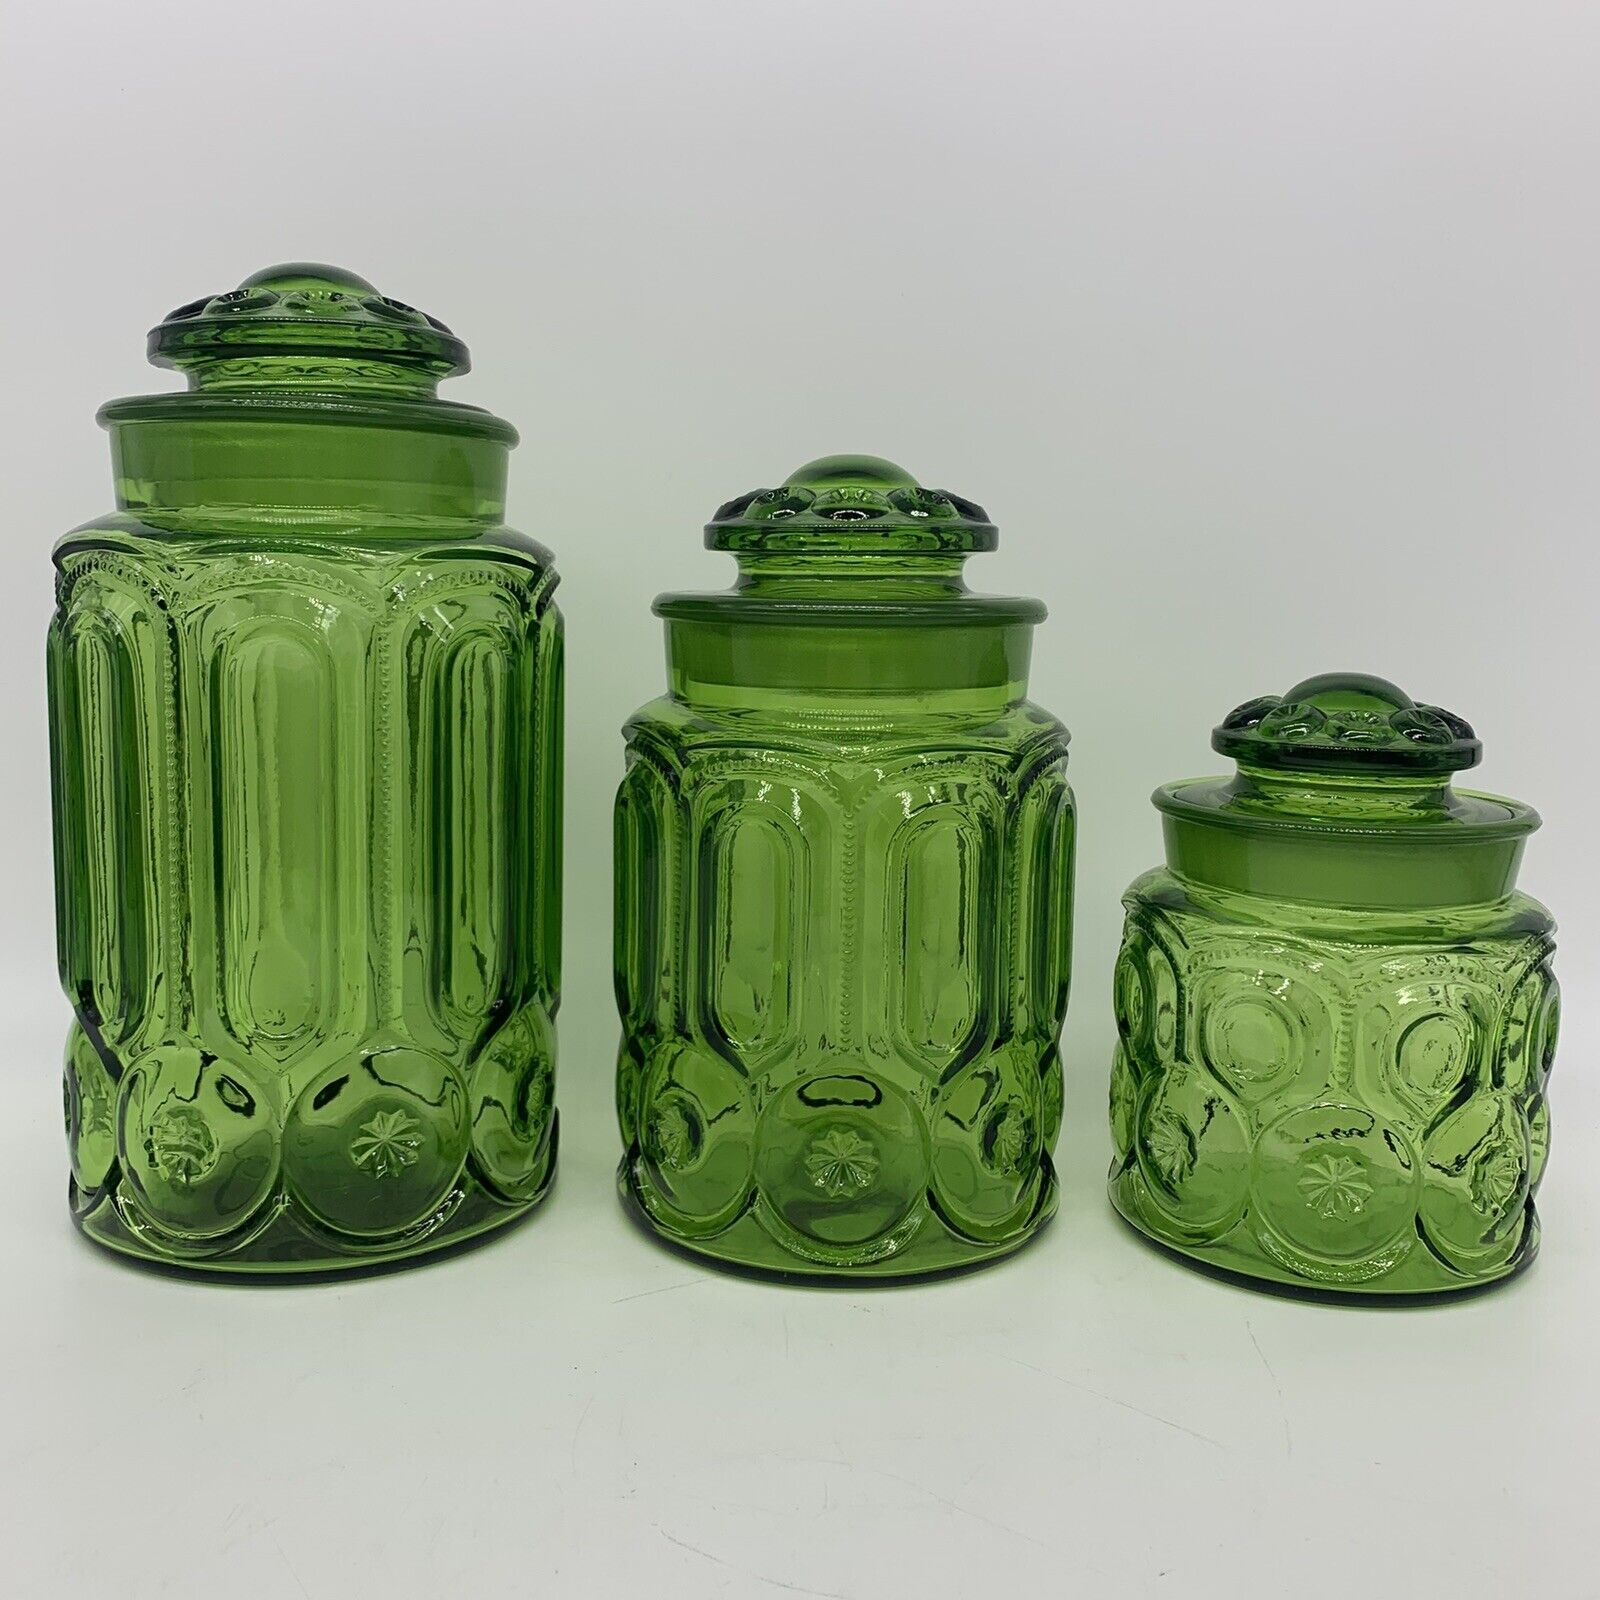 3 pc. VTG 1940s L.E. Smith Moon & Stars Green Glass Apothecary Canister Jar Set